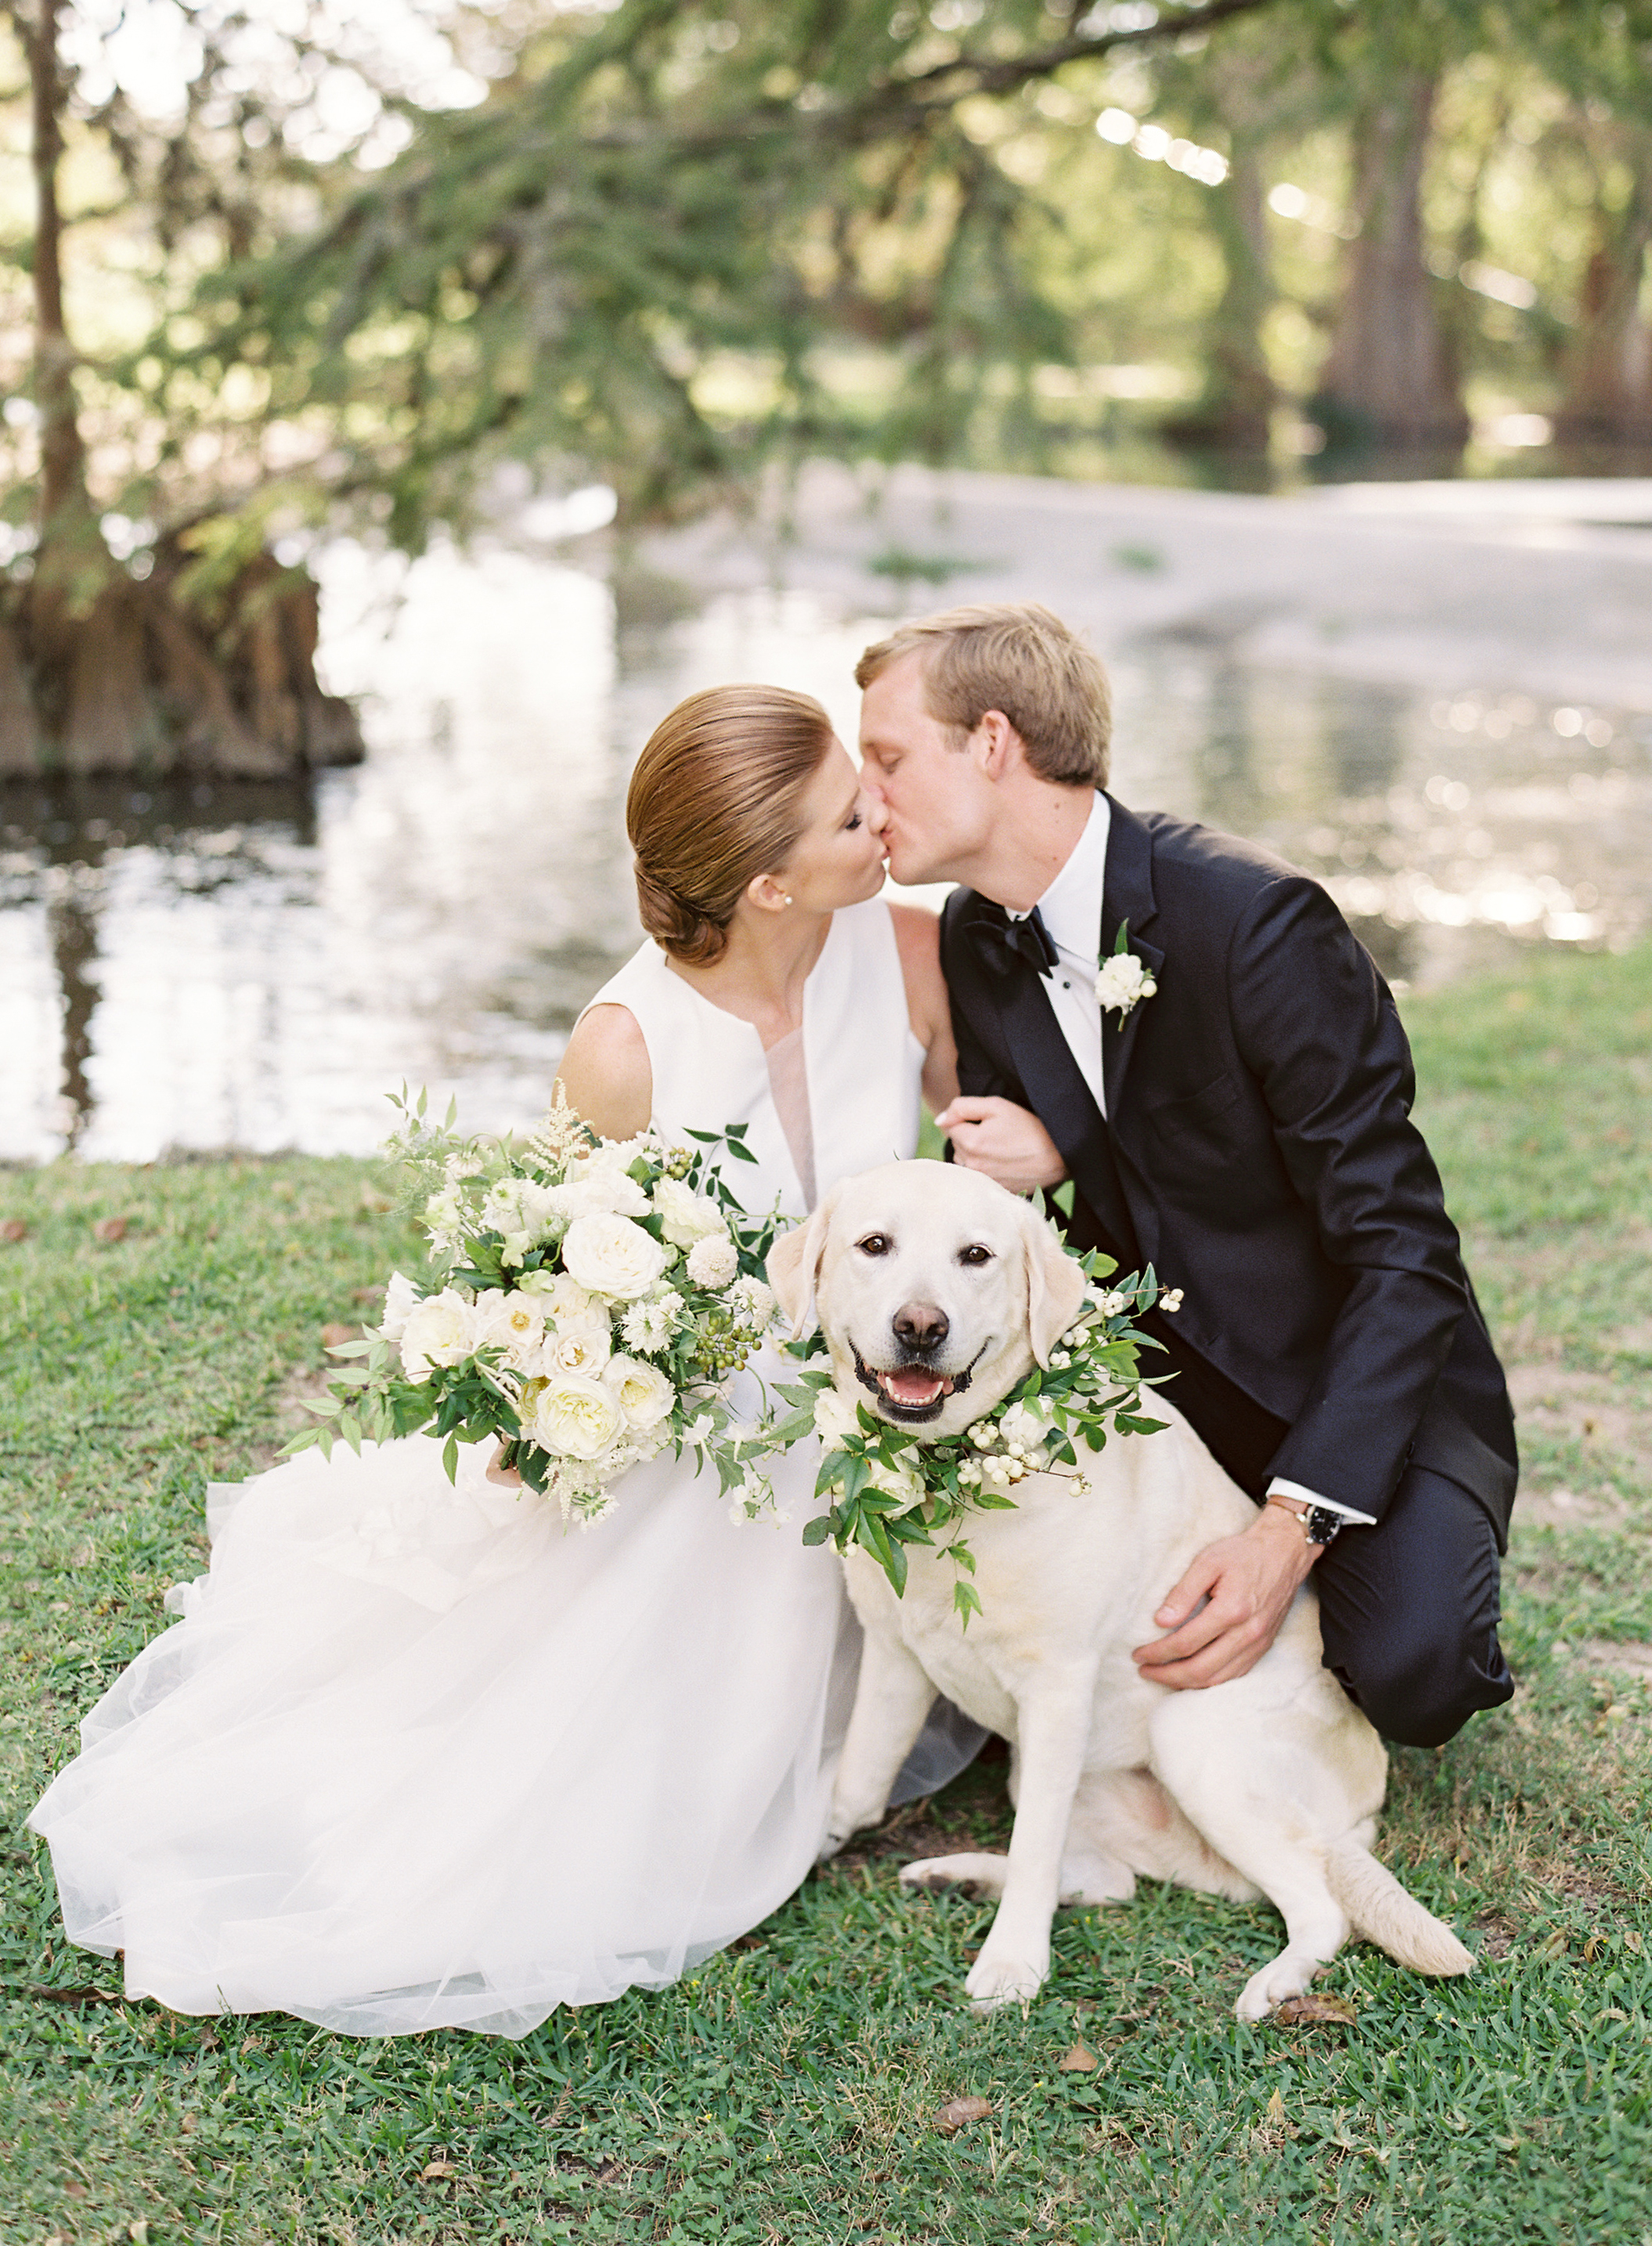 Martin & Scott - A Sophisticated Hill Country Wedding